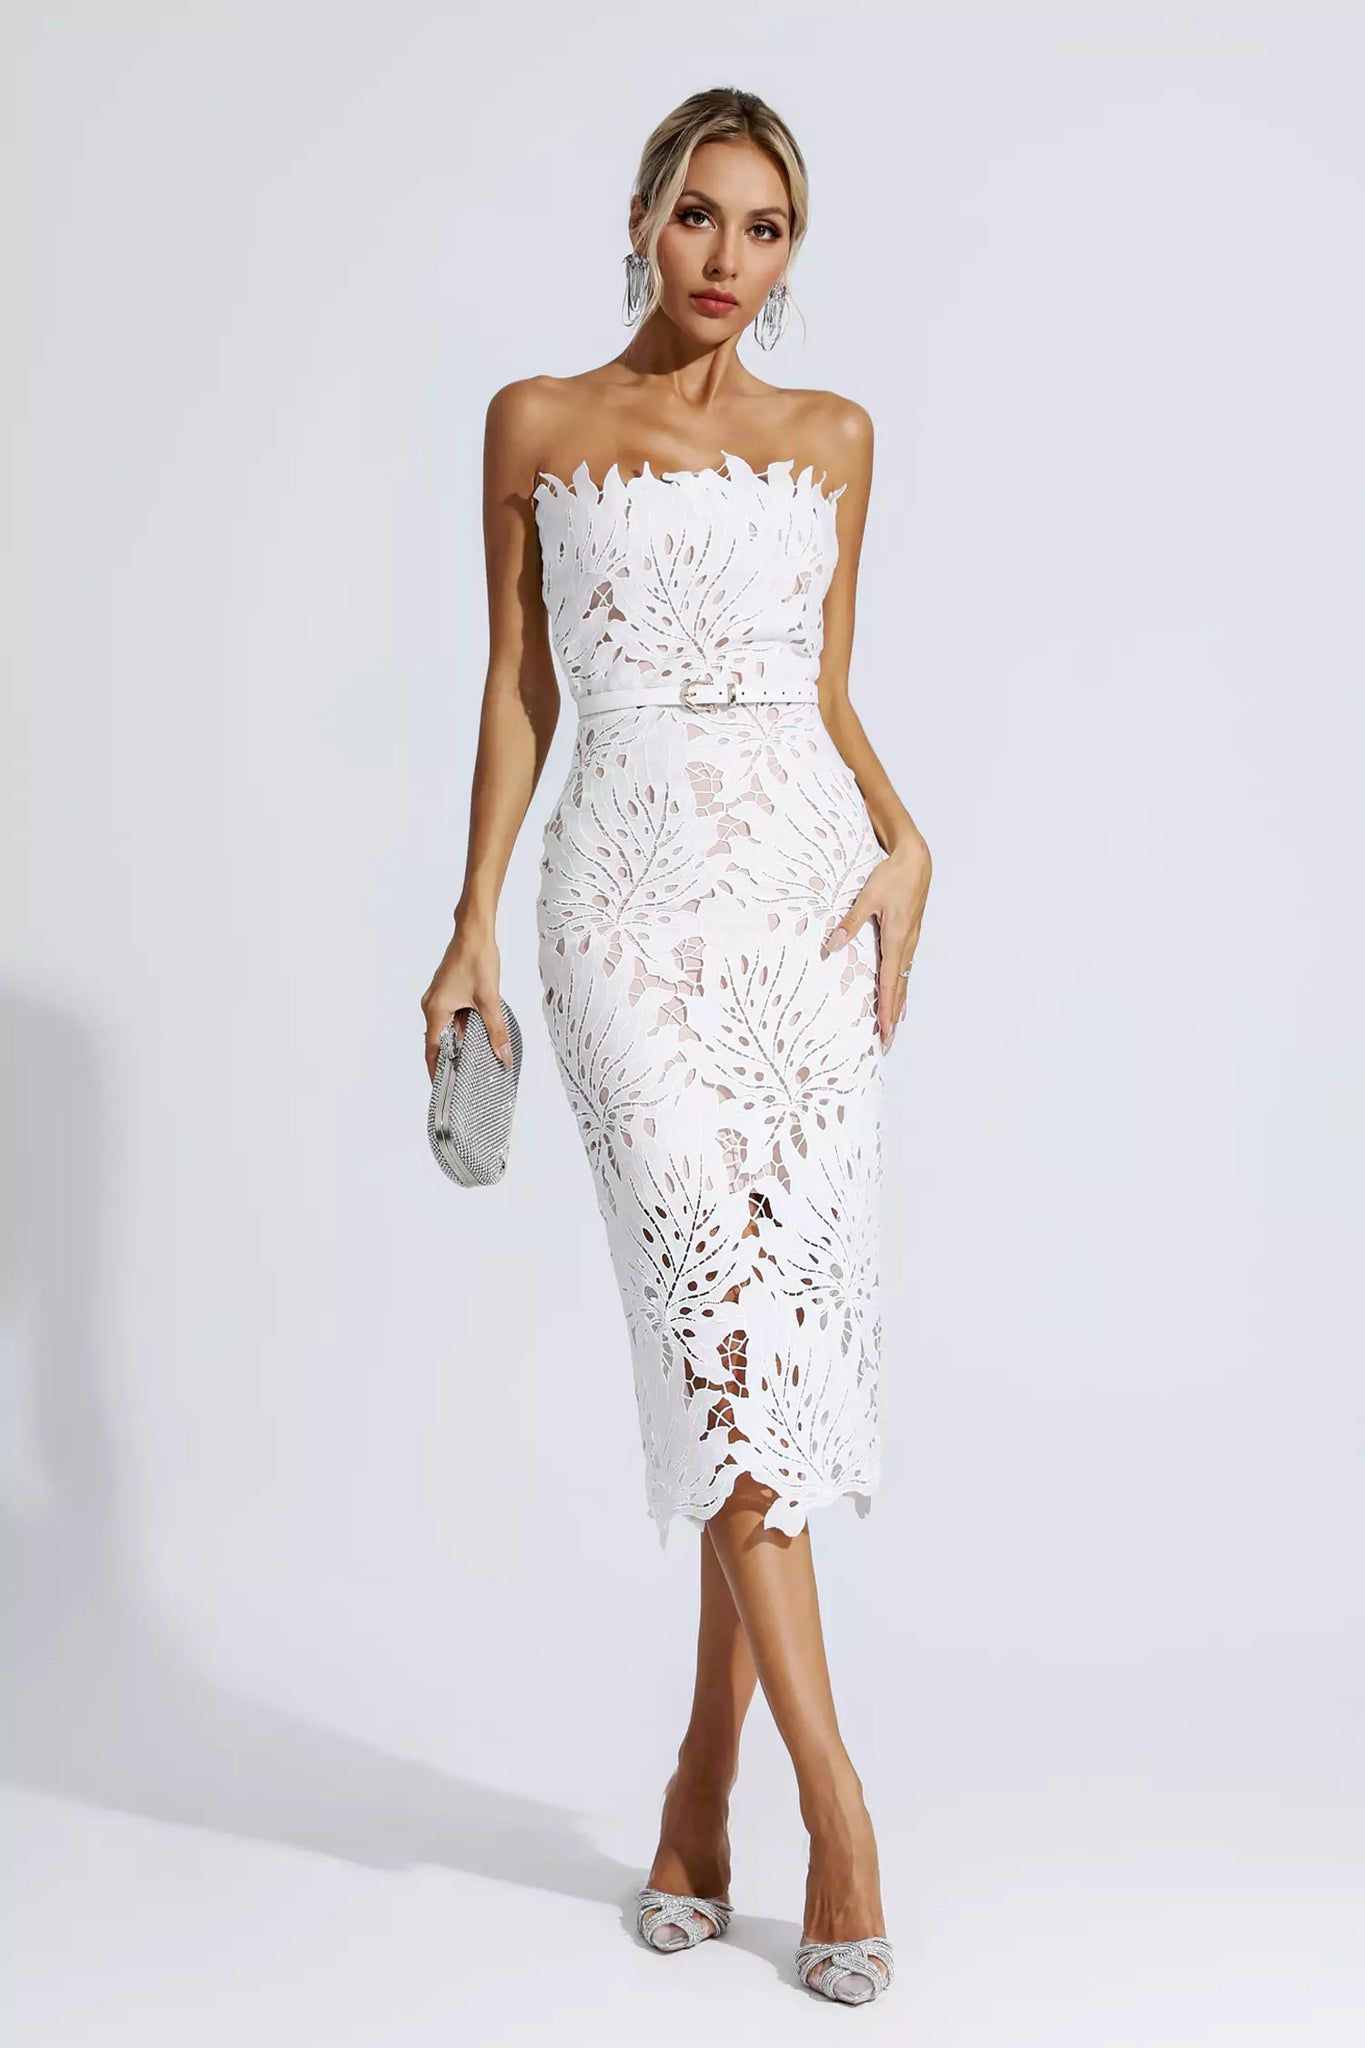 How to Wear White Lace Midi Dress: Best 13 Refreshing Outfit Ideas for Women